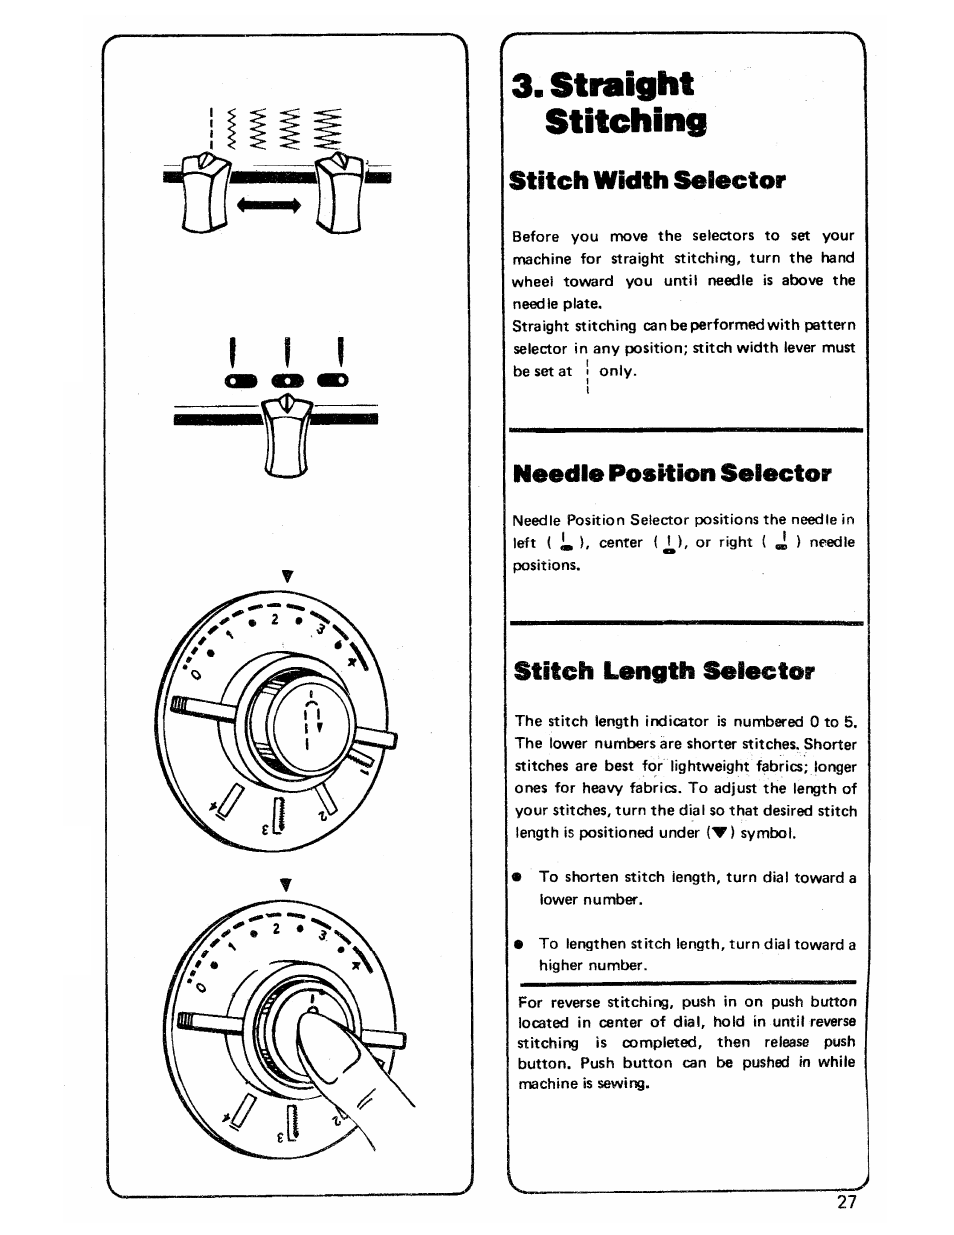 Straight stitching, Stitch width selector, Stitch length selector | SINGER 3103 User Manual | Page 29 / 71